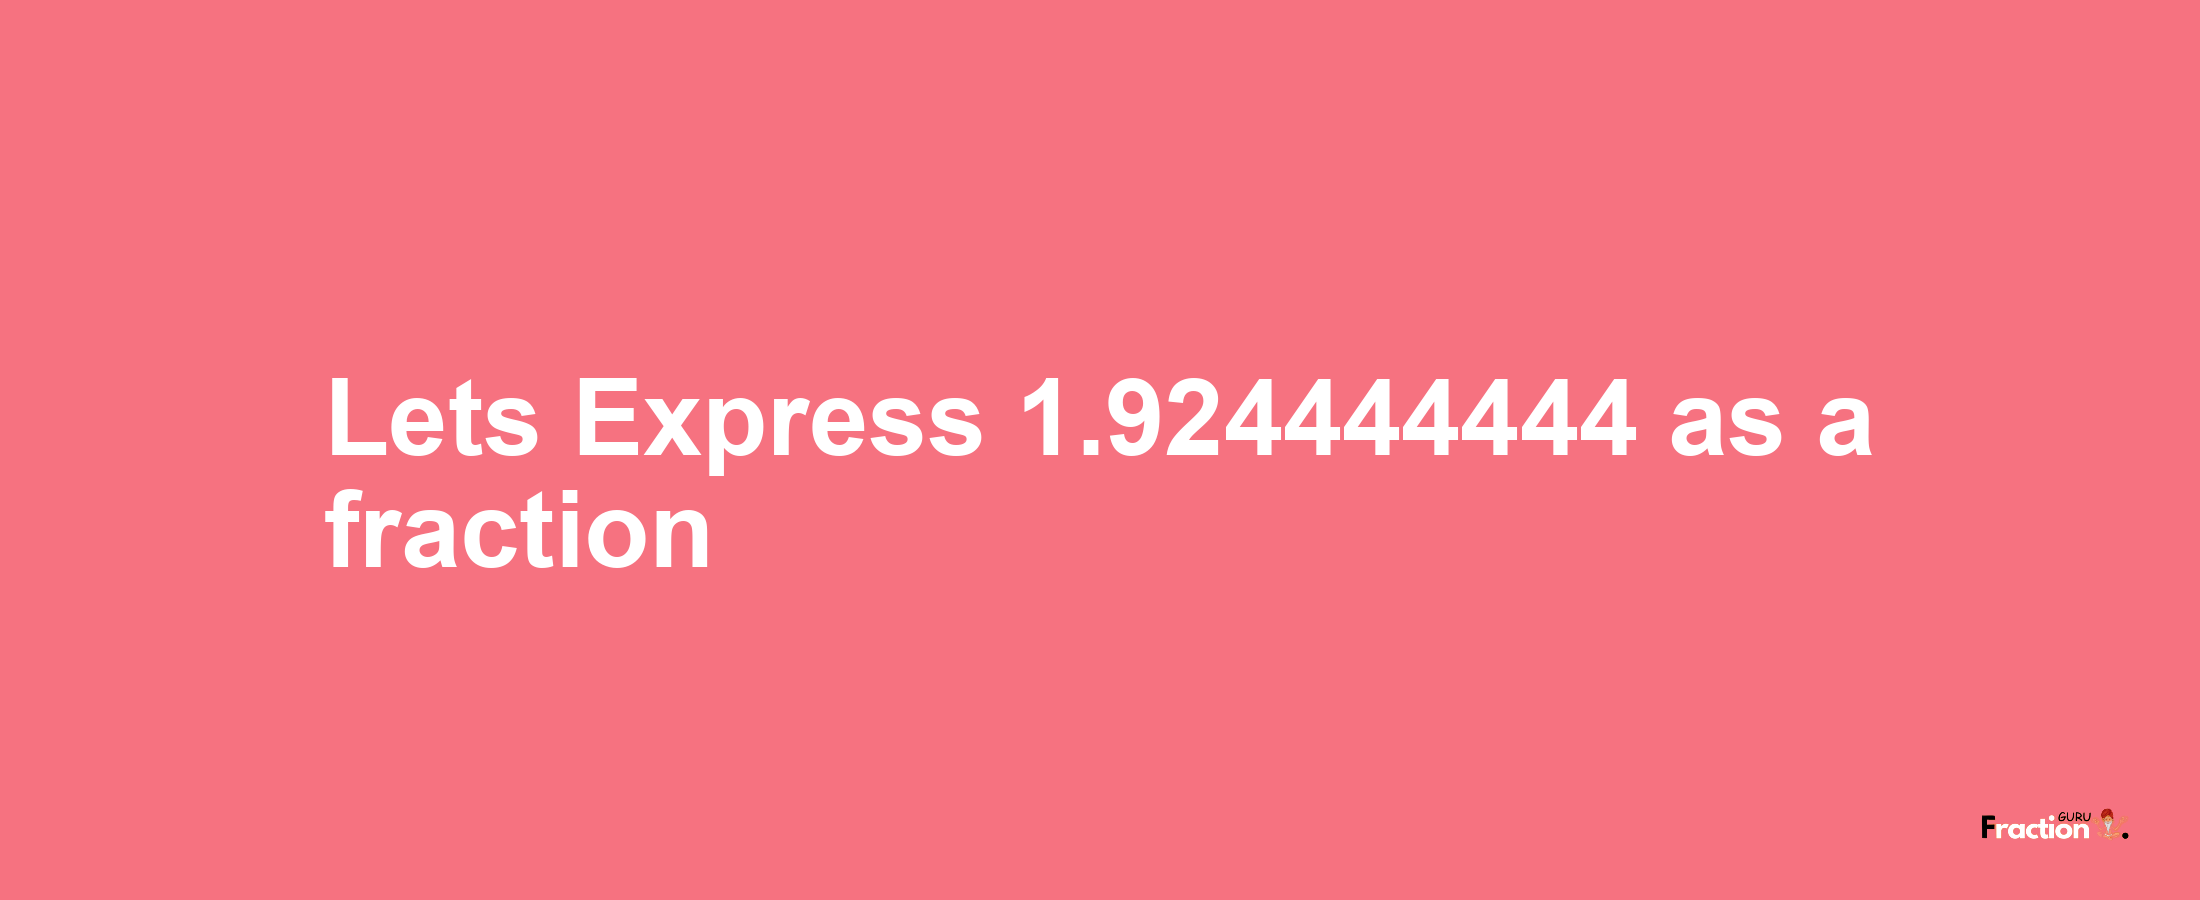 Lets Express 1.924444444 as afraction